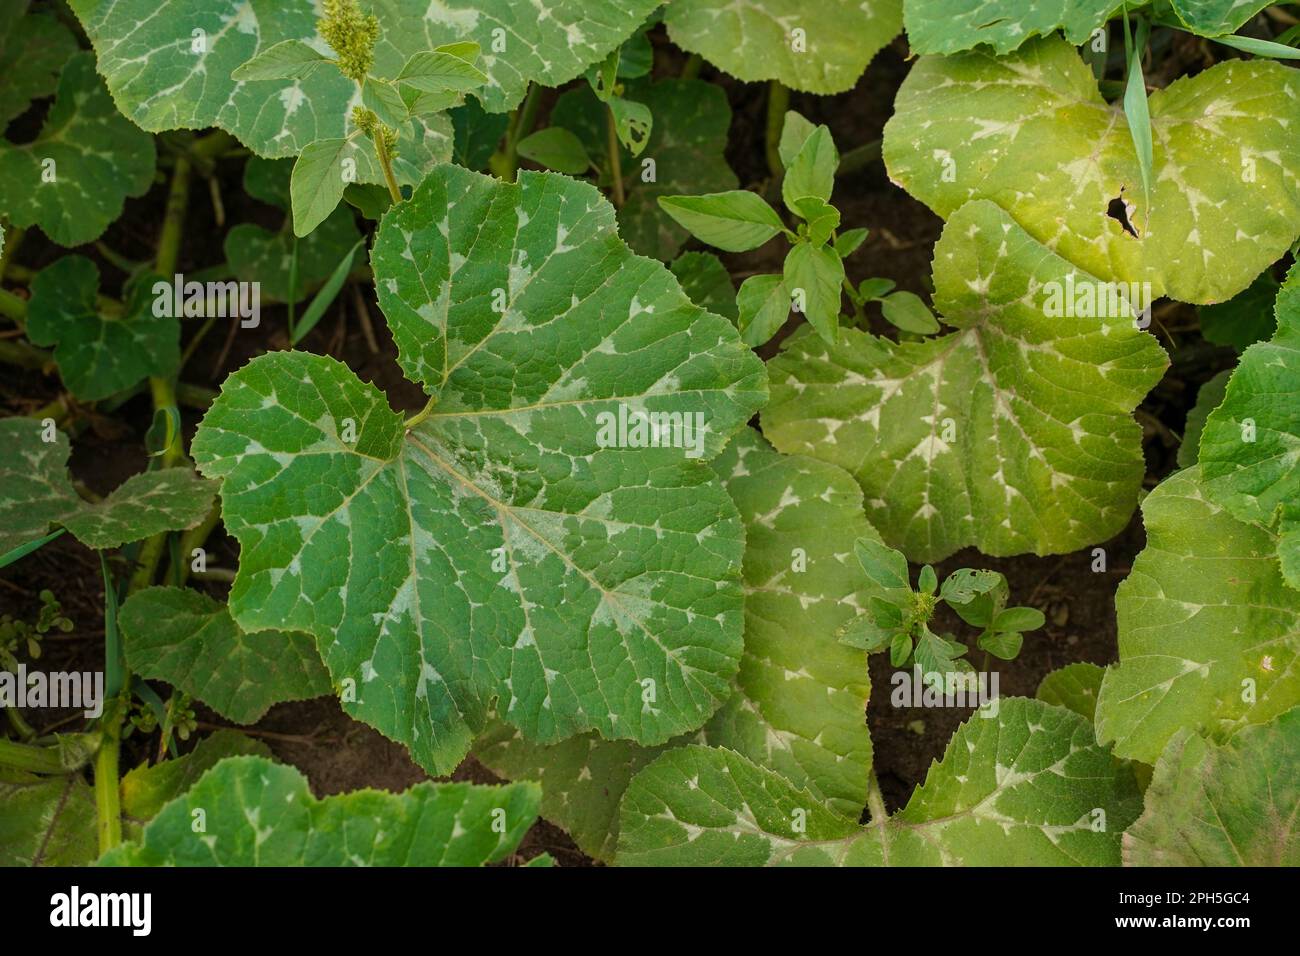 Large zucchini leaves infected with mildew. Close-up, top view. Diseases of zucchini. Fungal disease contaminating vegetables, cucurbits Stock Photo